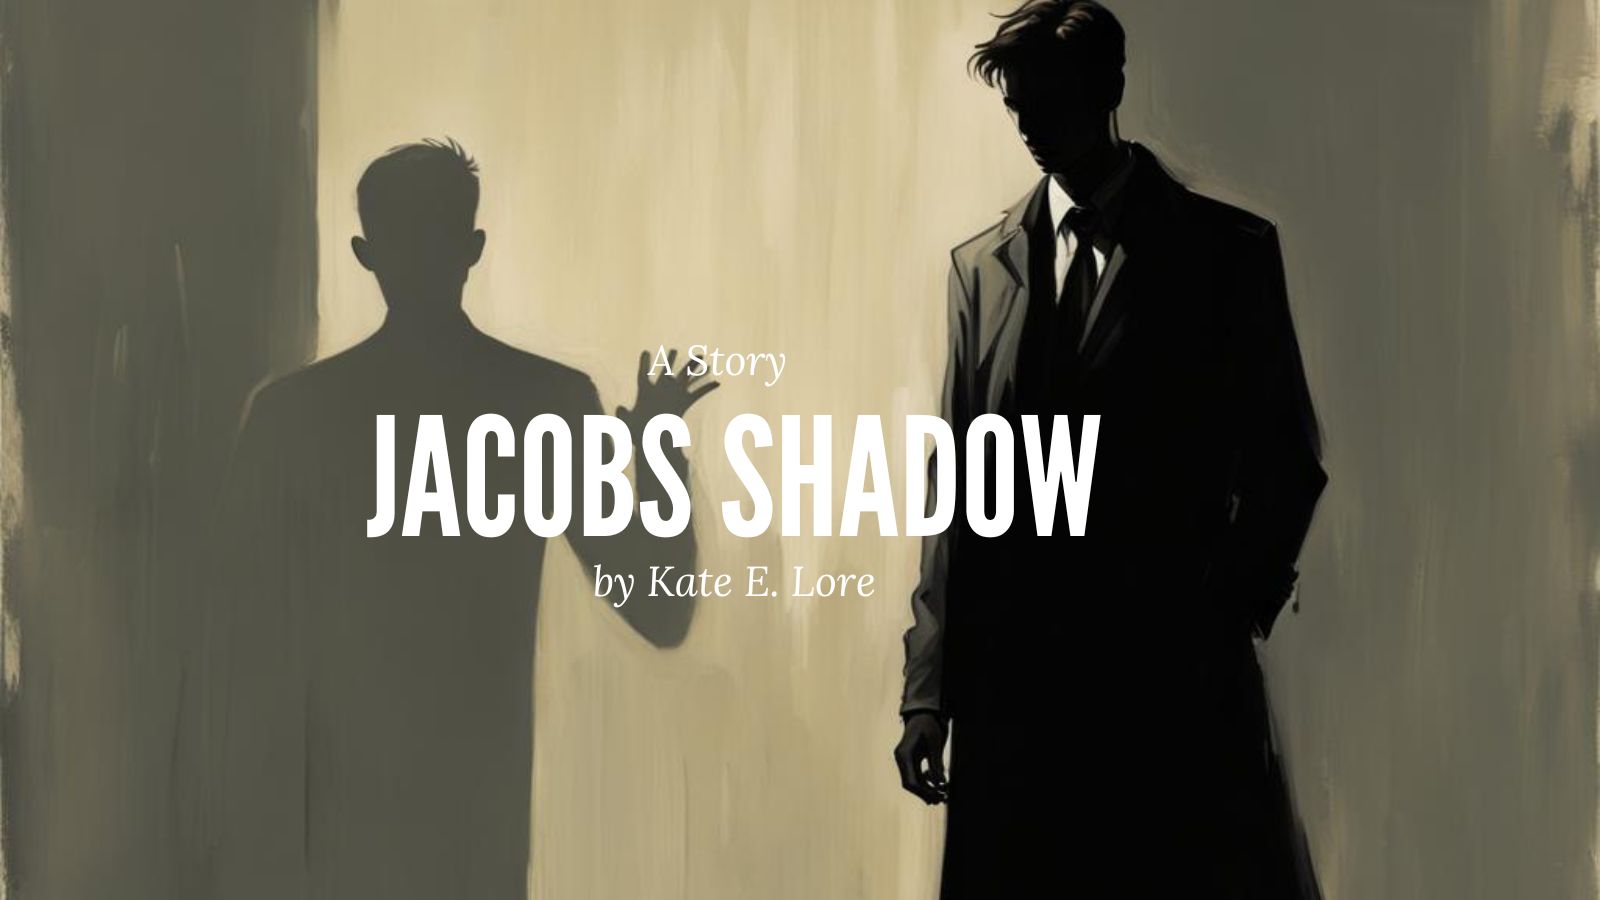 Jacobs Shadow by Kate E. Lore